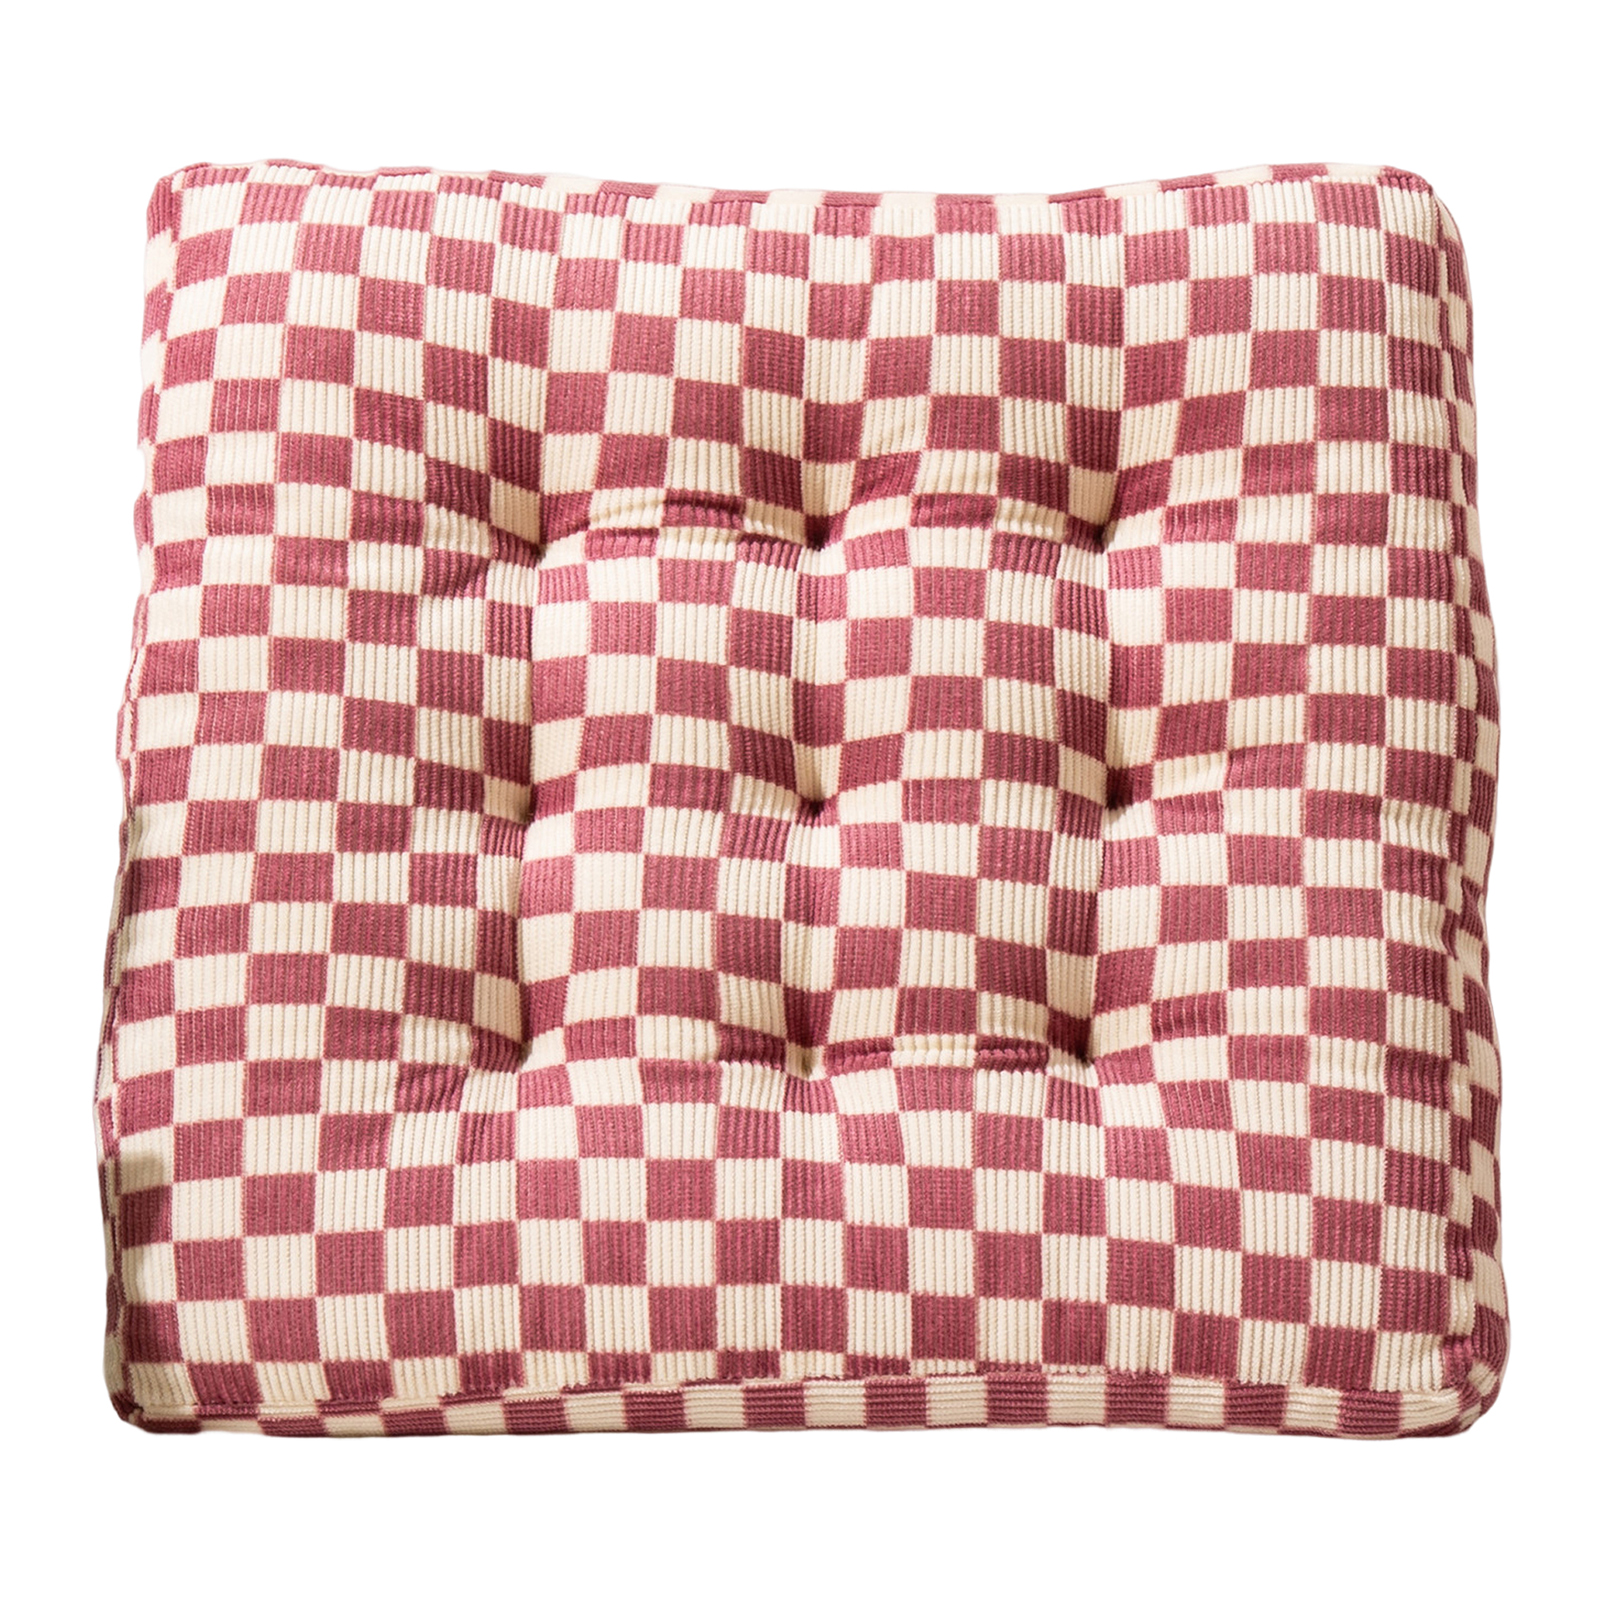 Cheers.US Seat Cushion, Chair Cushion, Comfort Chair Pads, Chair Mat for Indoor, Outdoor Dining Chair, Office Chair, Desk Chair - image 2 of 7